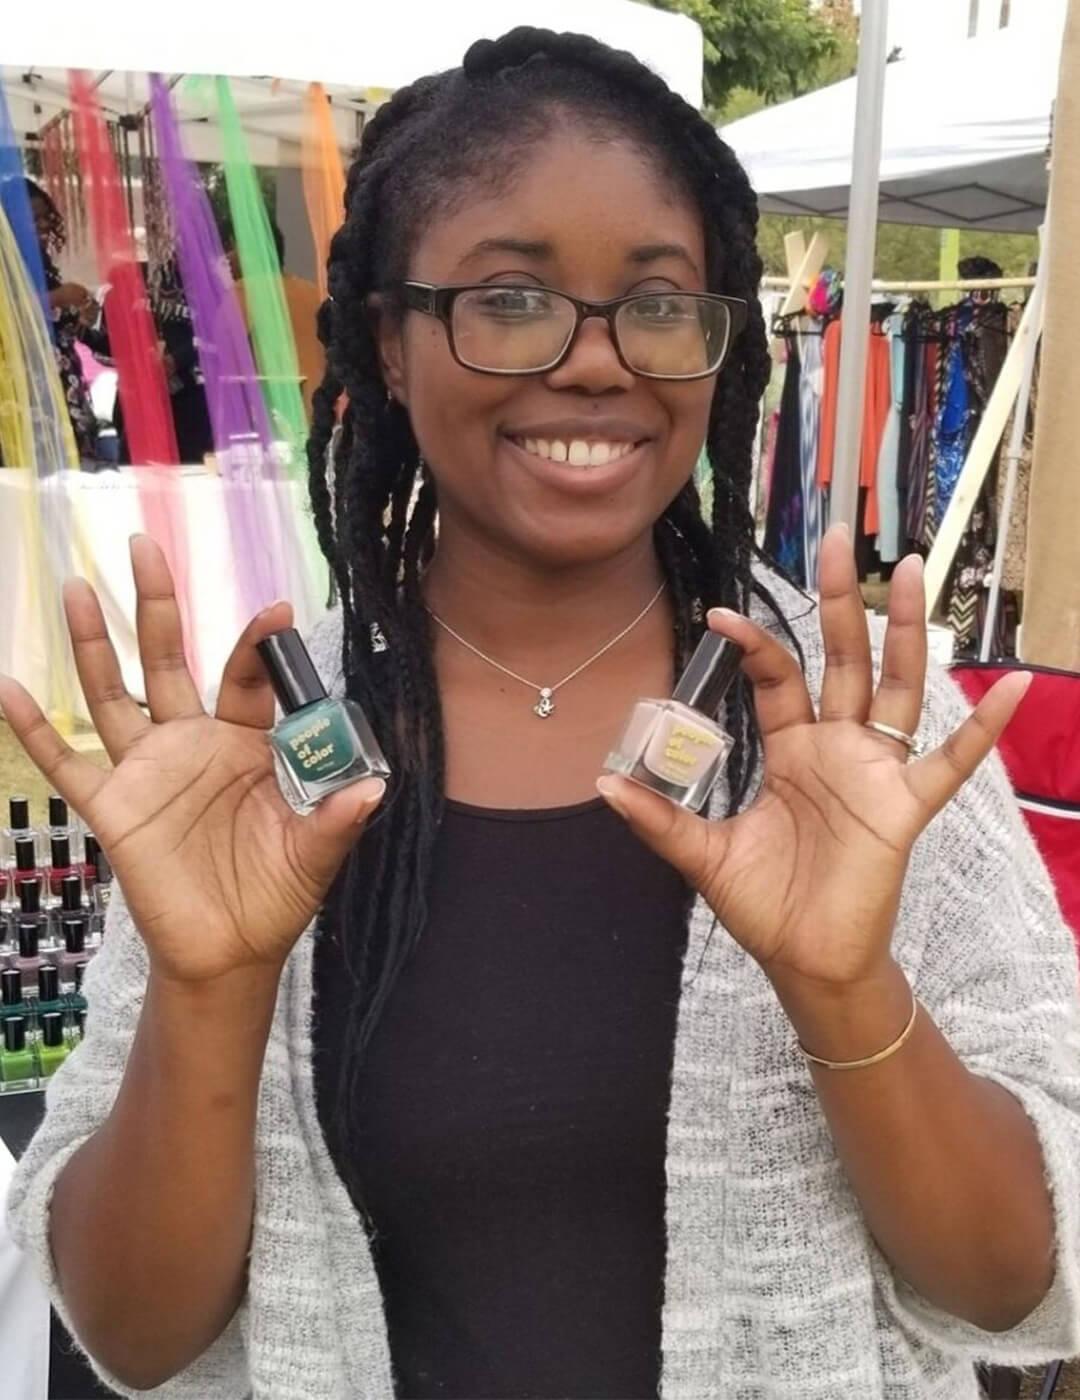 PEOPLE OF COLOR BEAUTY founder Jacqueline Carrington posing and holding two bottles of nail polish